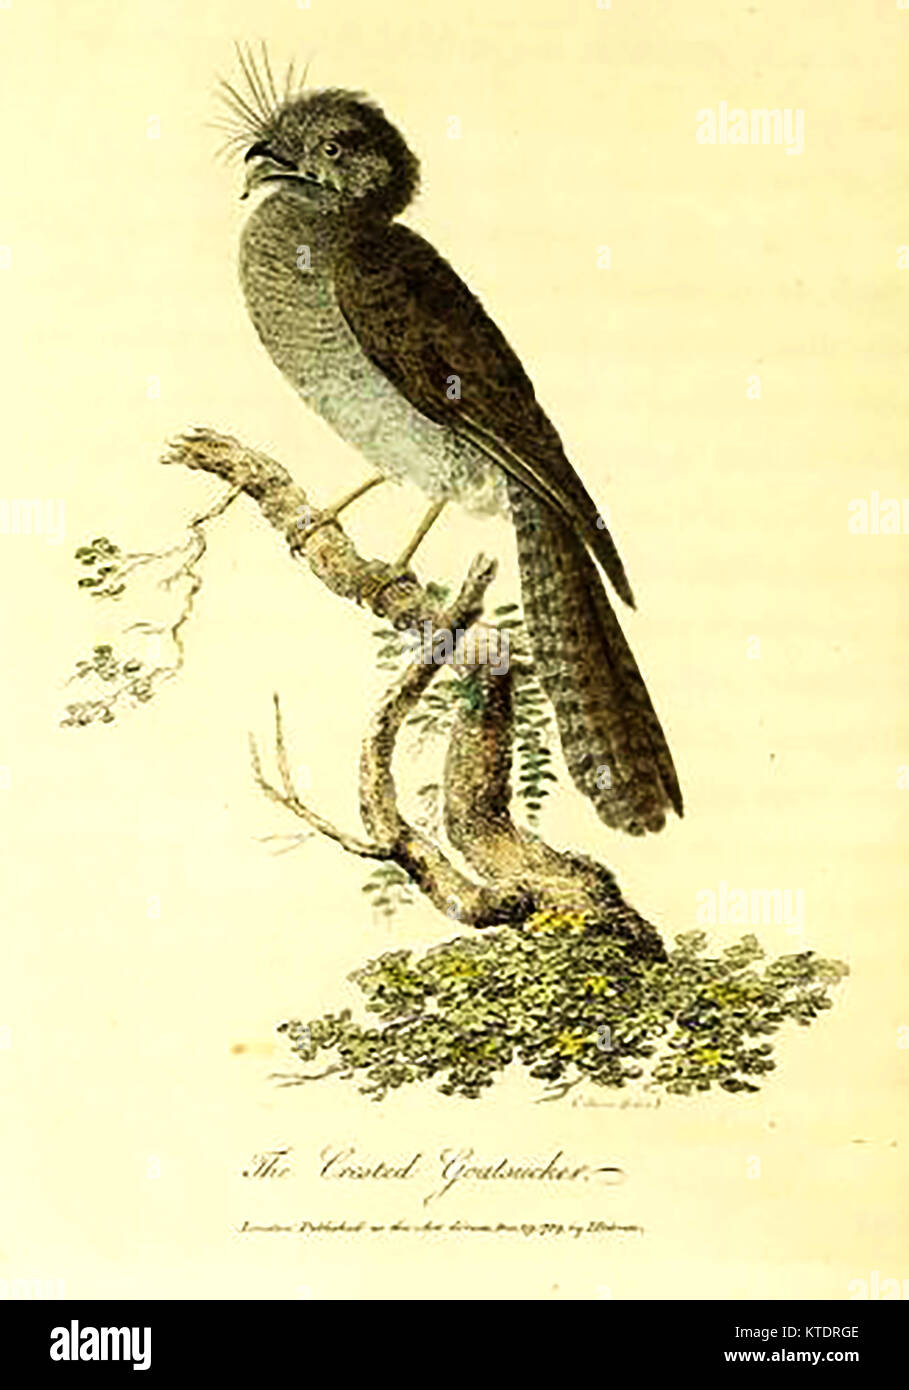 Australian wildlife -The Australian Crested Goat Sucker  or Nightjar - Possibly a  tawny frogmouth (podargus strigoides) or Australian owlet-nightjar (aegotheles cristatus) (from ' Journal of a voyage to New South Wales...' )  by John White 1790 Stock Photo